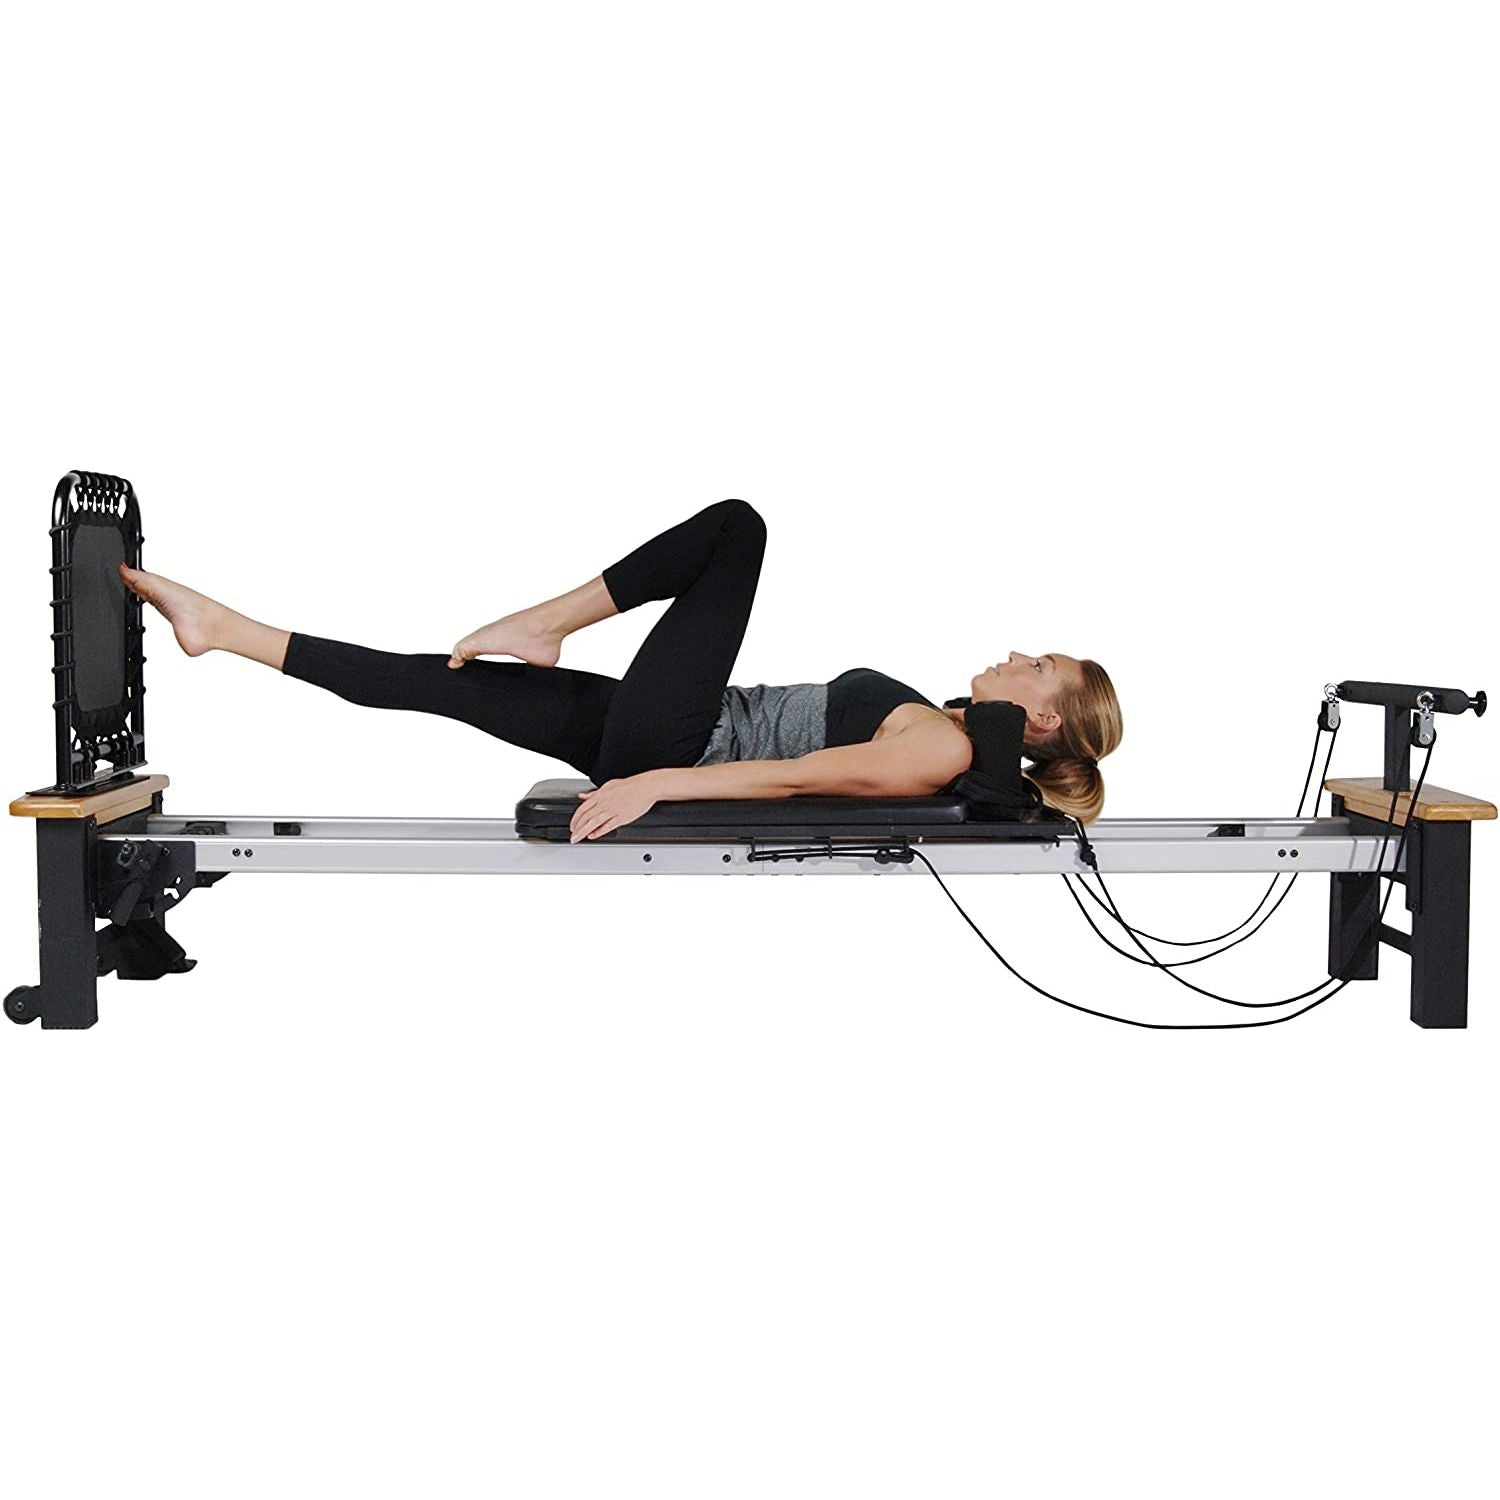 AeroPilates Premier Reformer - Pilates Reformer Workout Machine for Home  Gym - Cardio Fitness Rebounder - Up to 300 lbs Weight Capacity